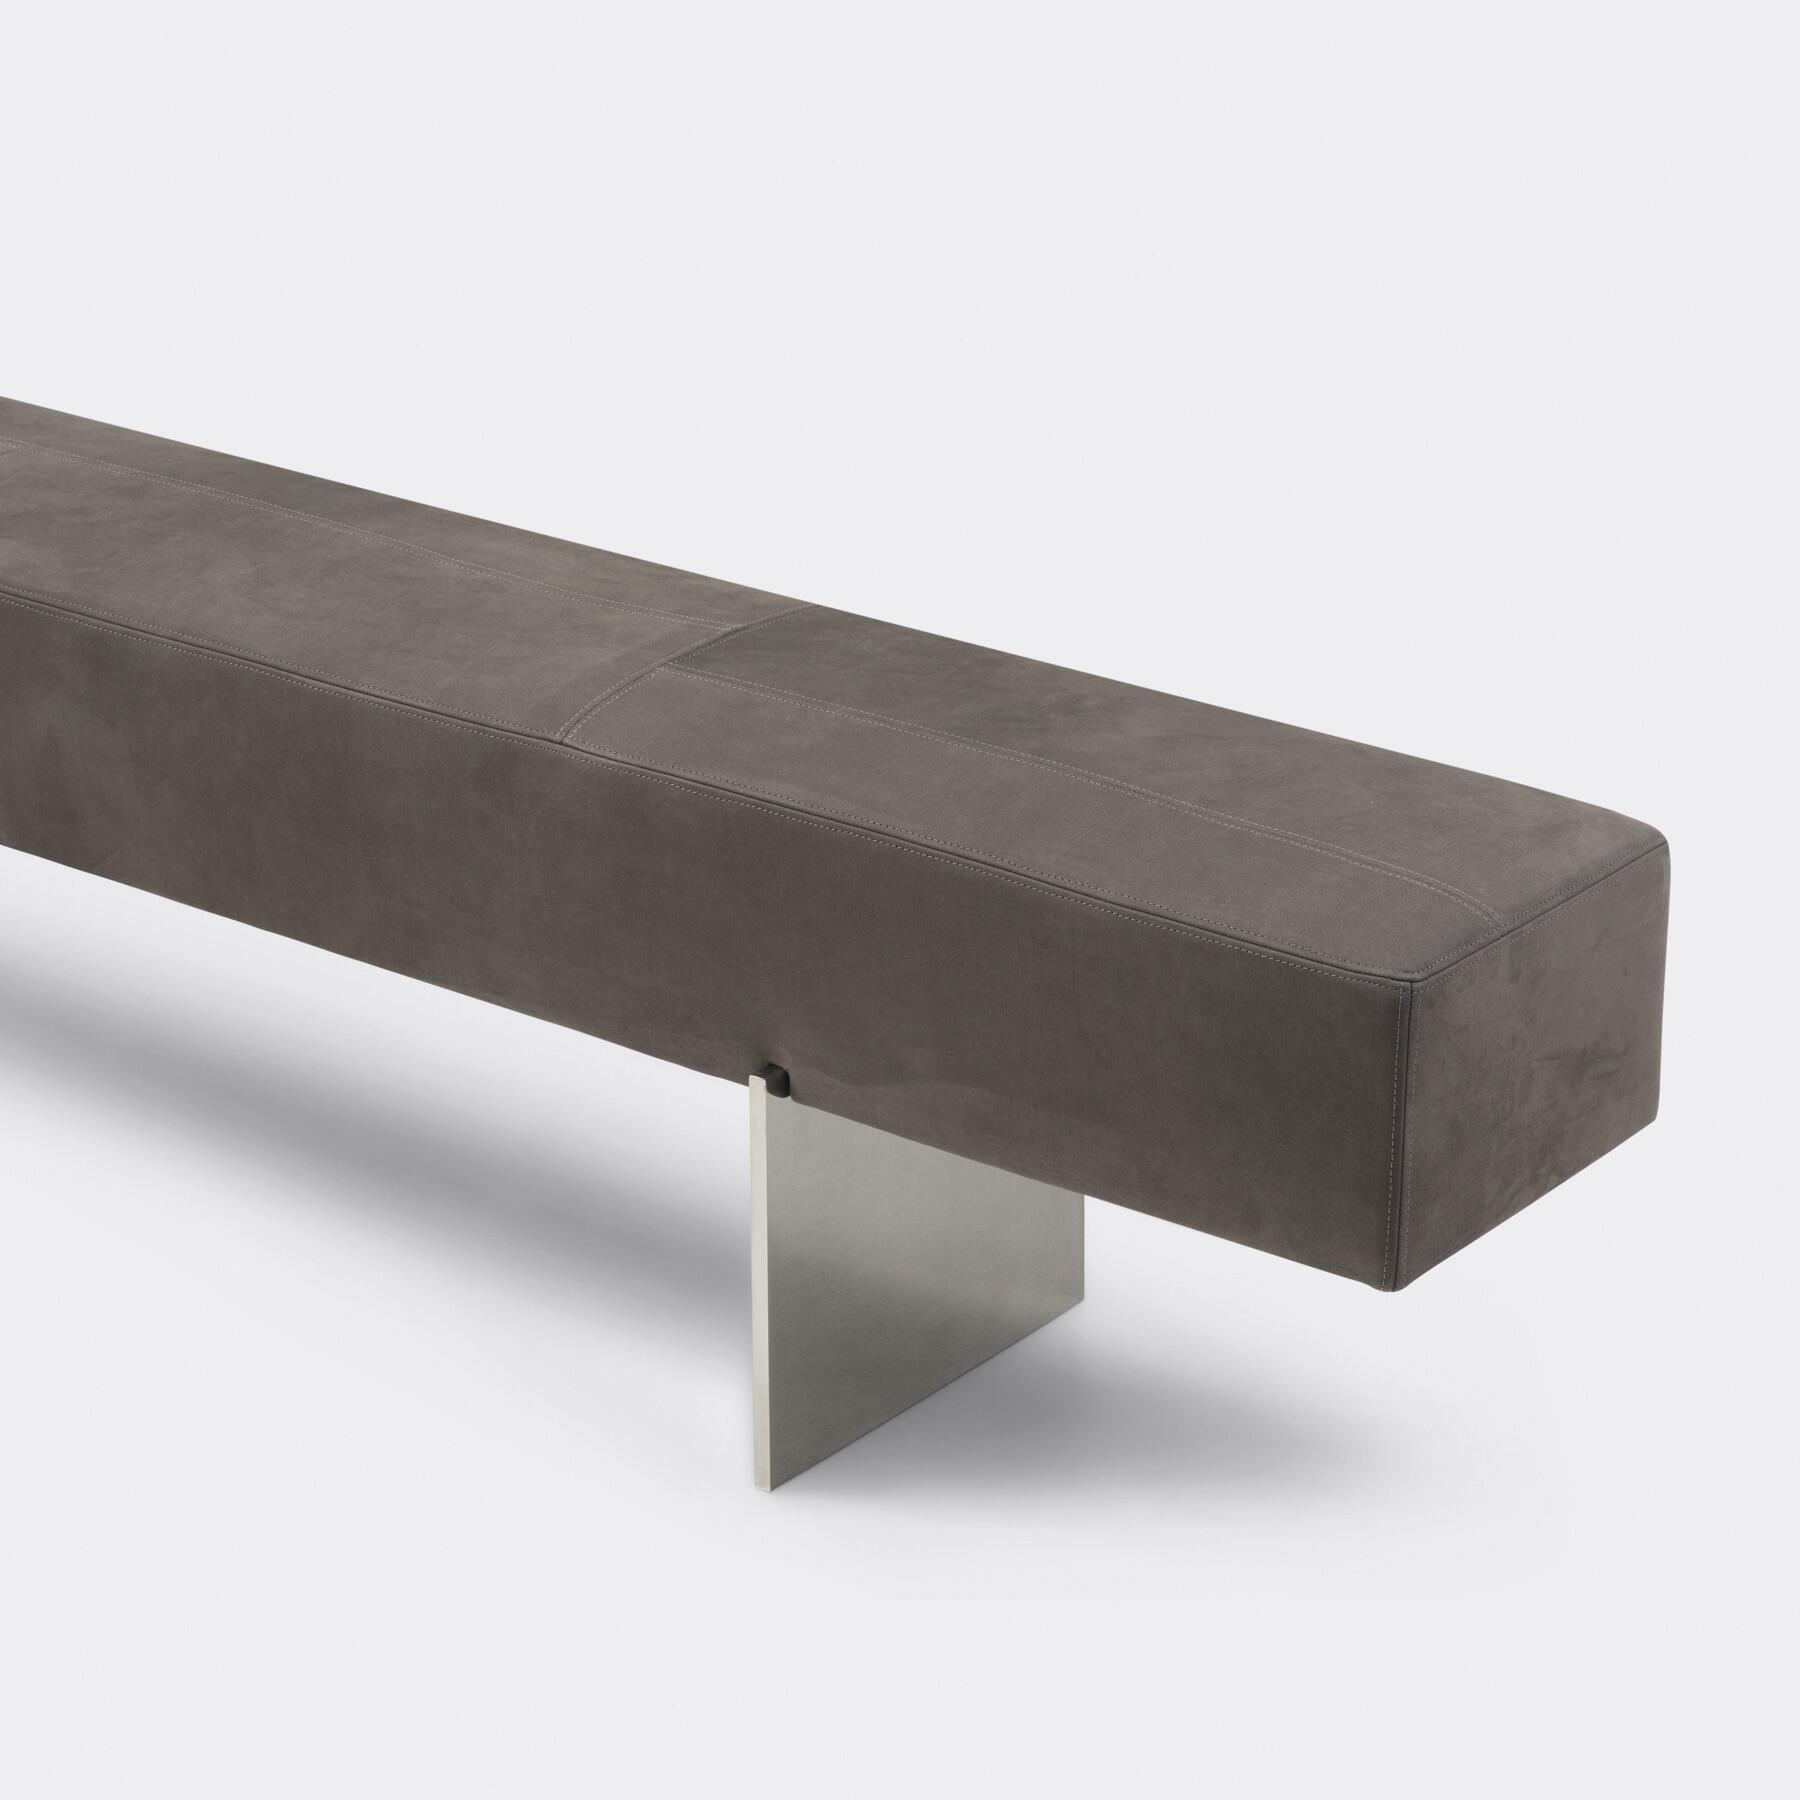 Upholstered Blok Bench, Leather, Mirrored Steel